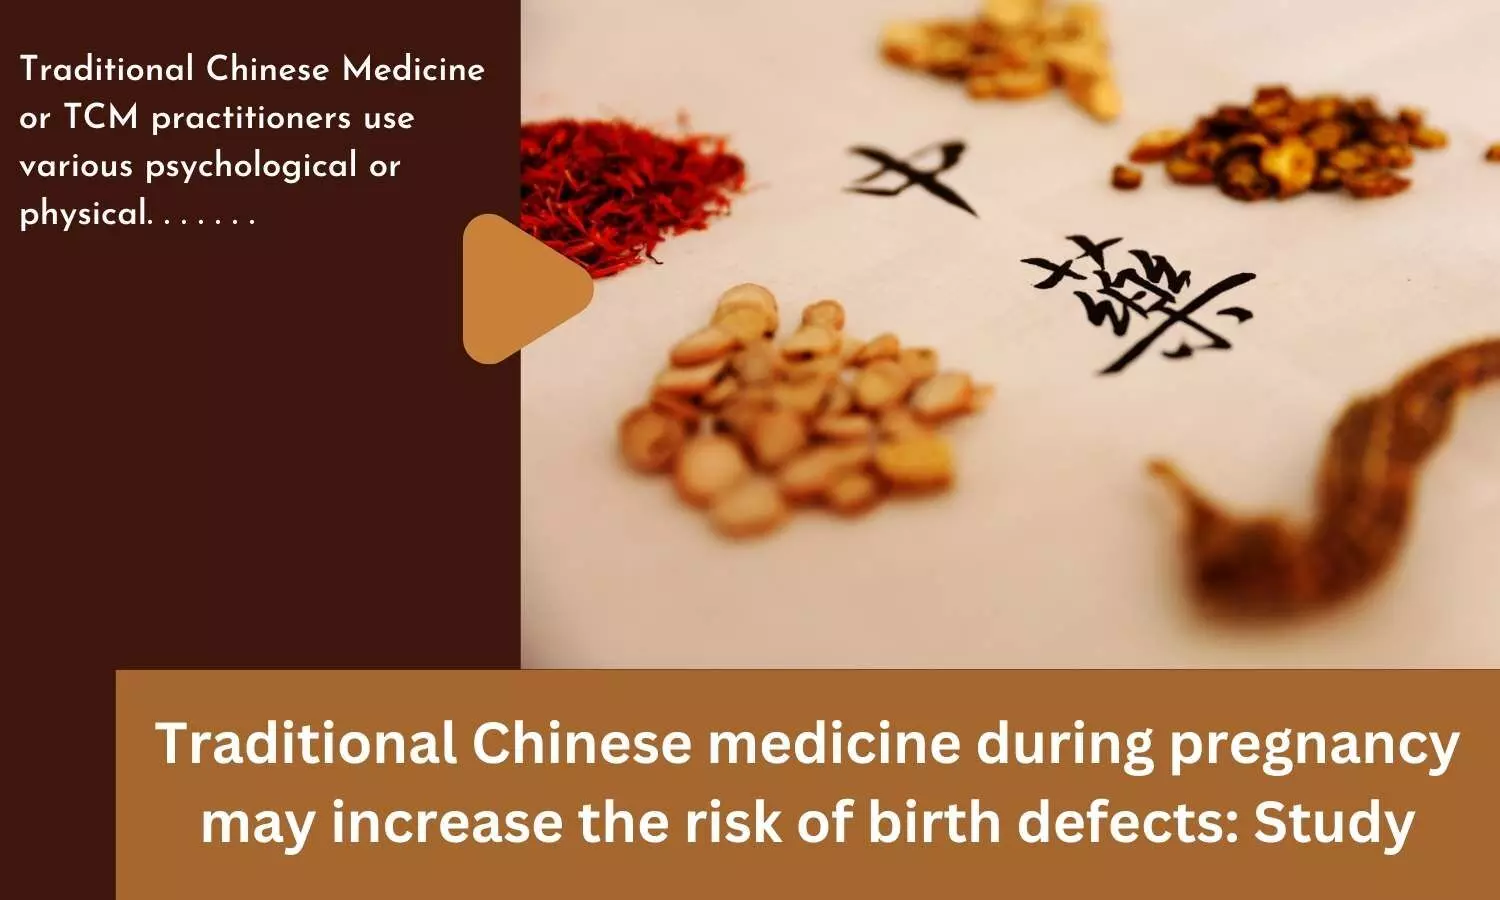 Traditional Chinese medicine during pregnancy may increase the risk of birth defects: Study